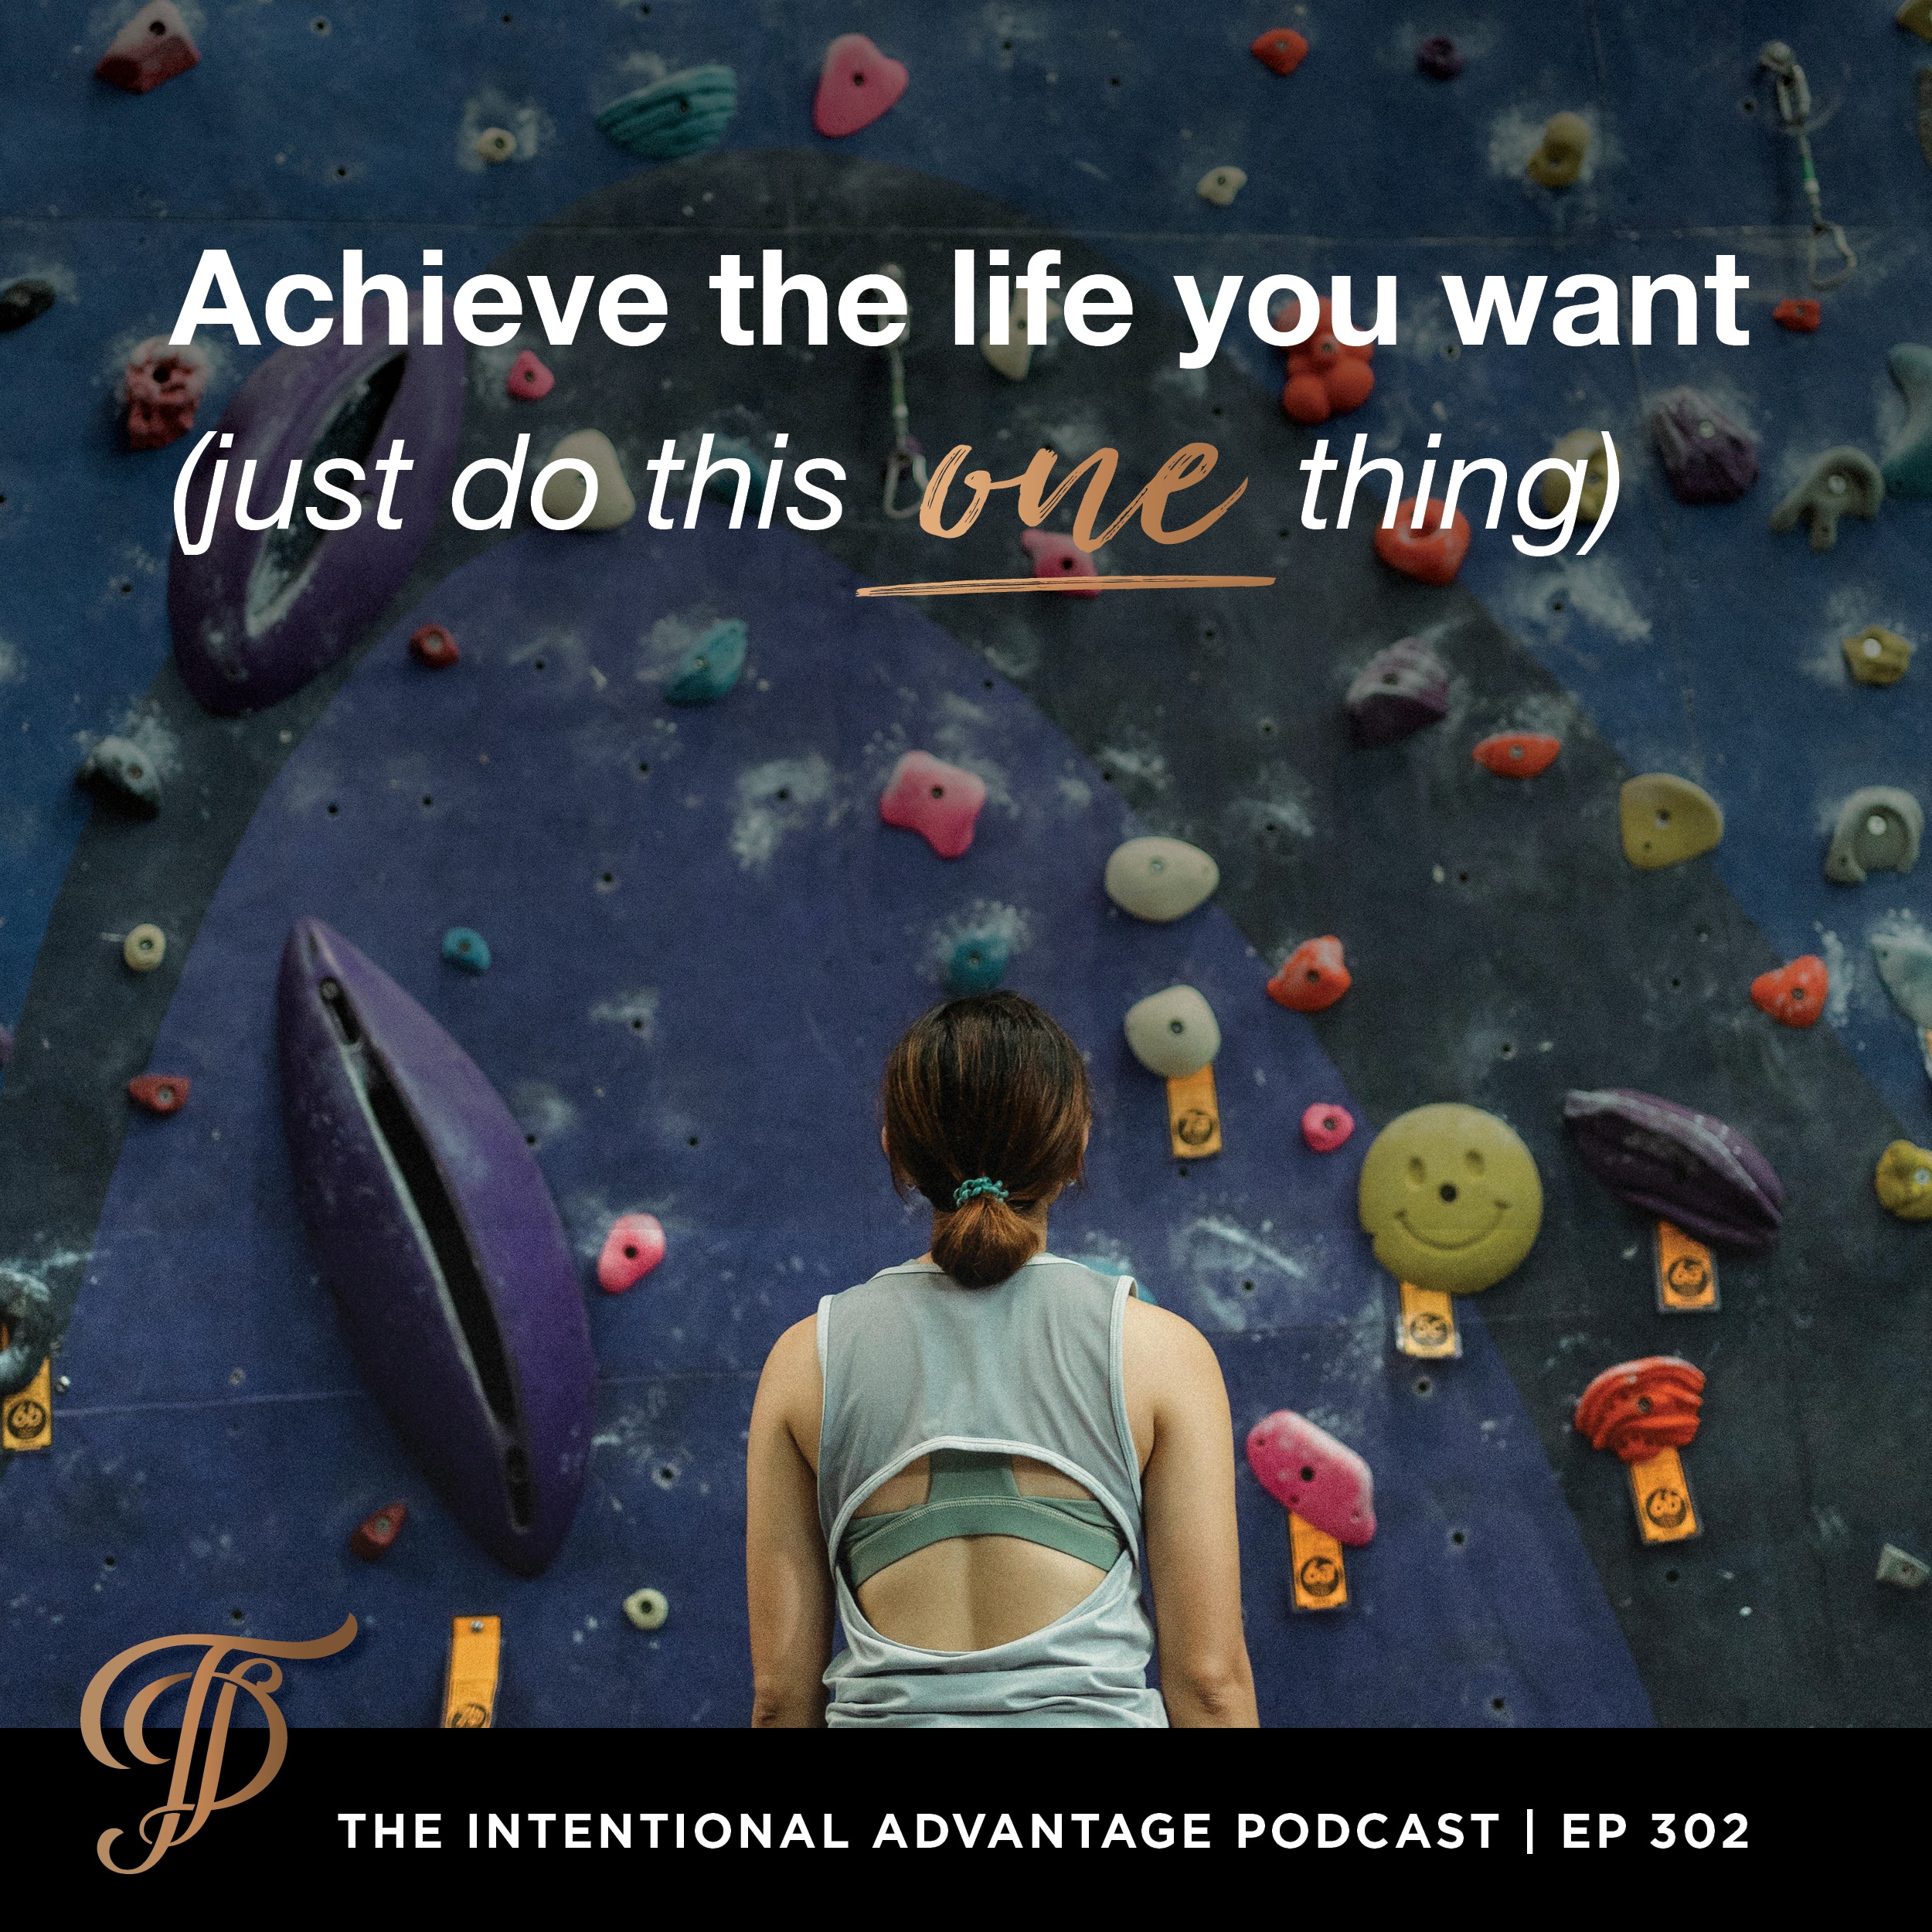 Intentional Advantage Podcast Tanya Dalton 3 things you can do to change your life or anything